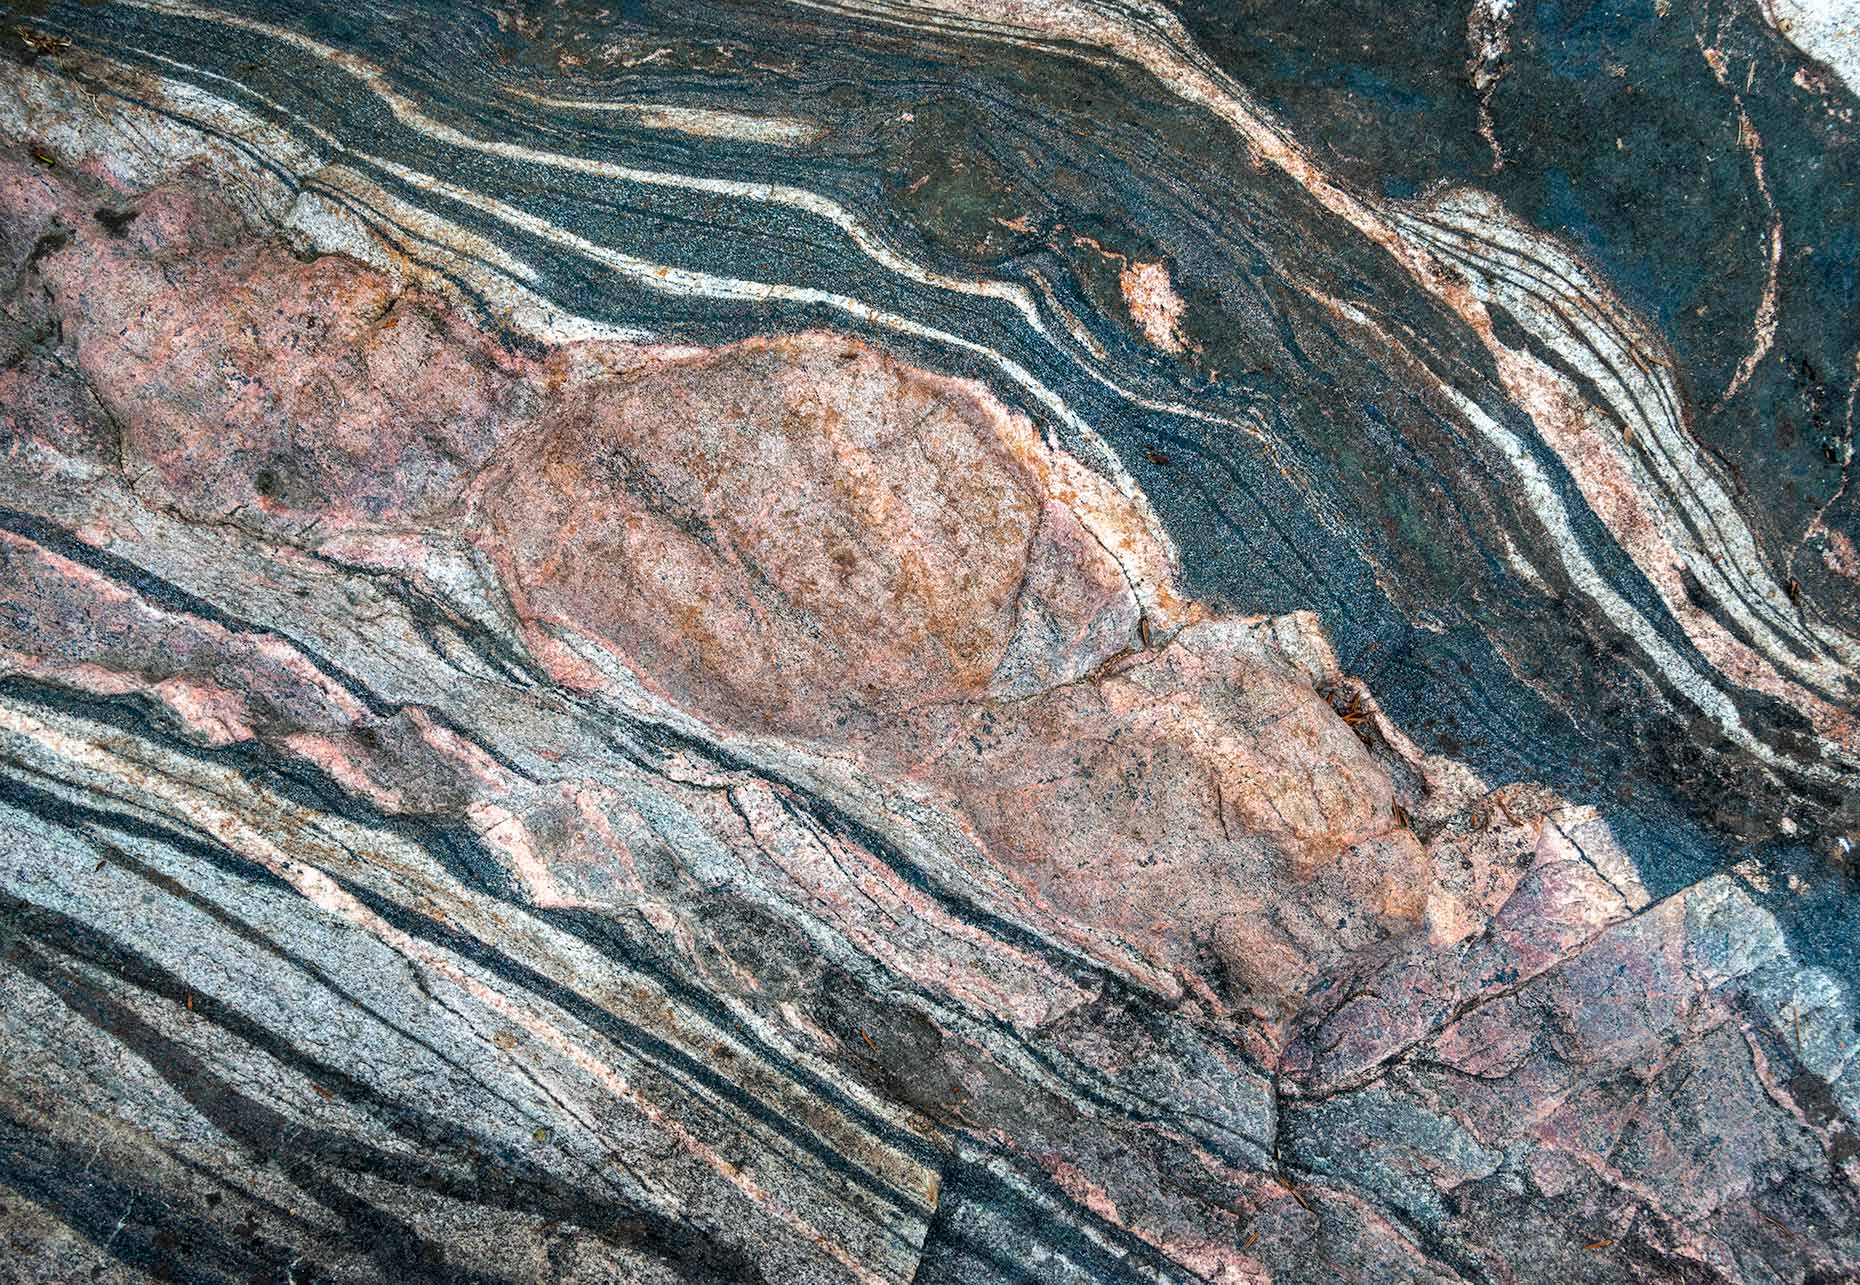 Banded Gneiss